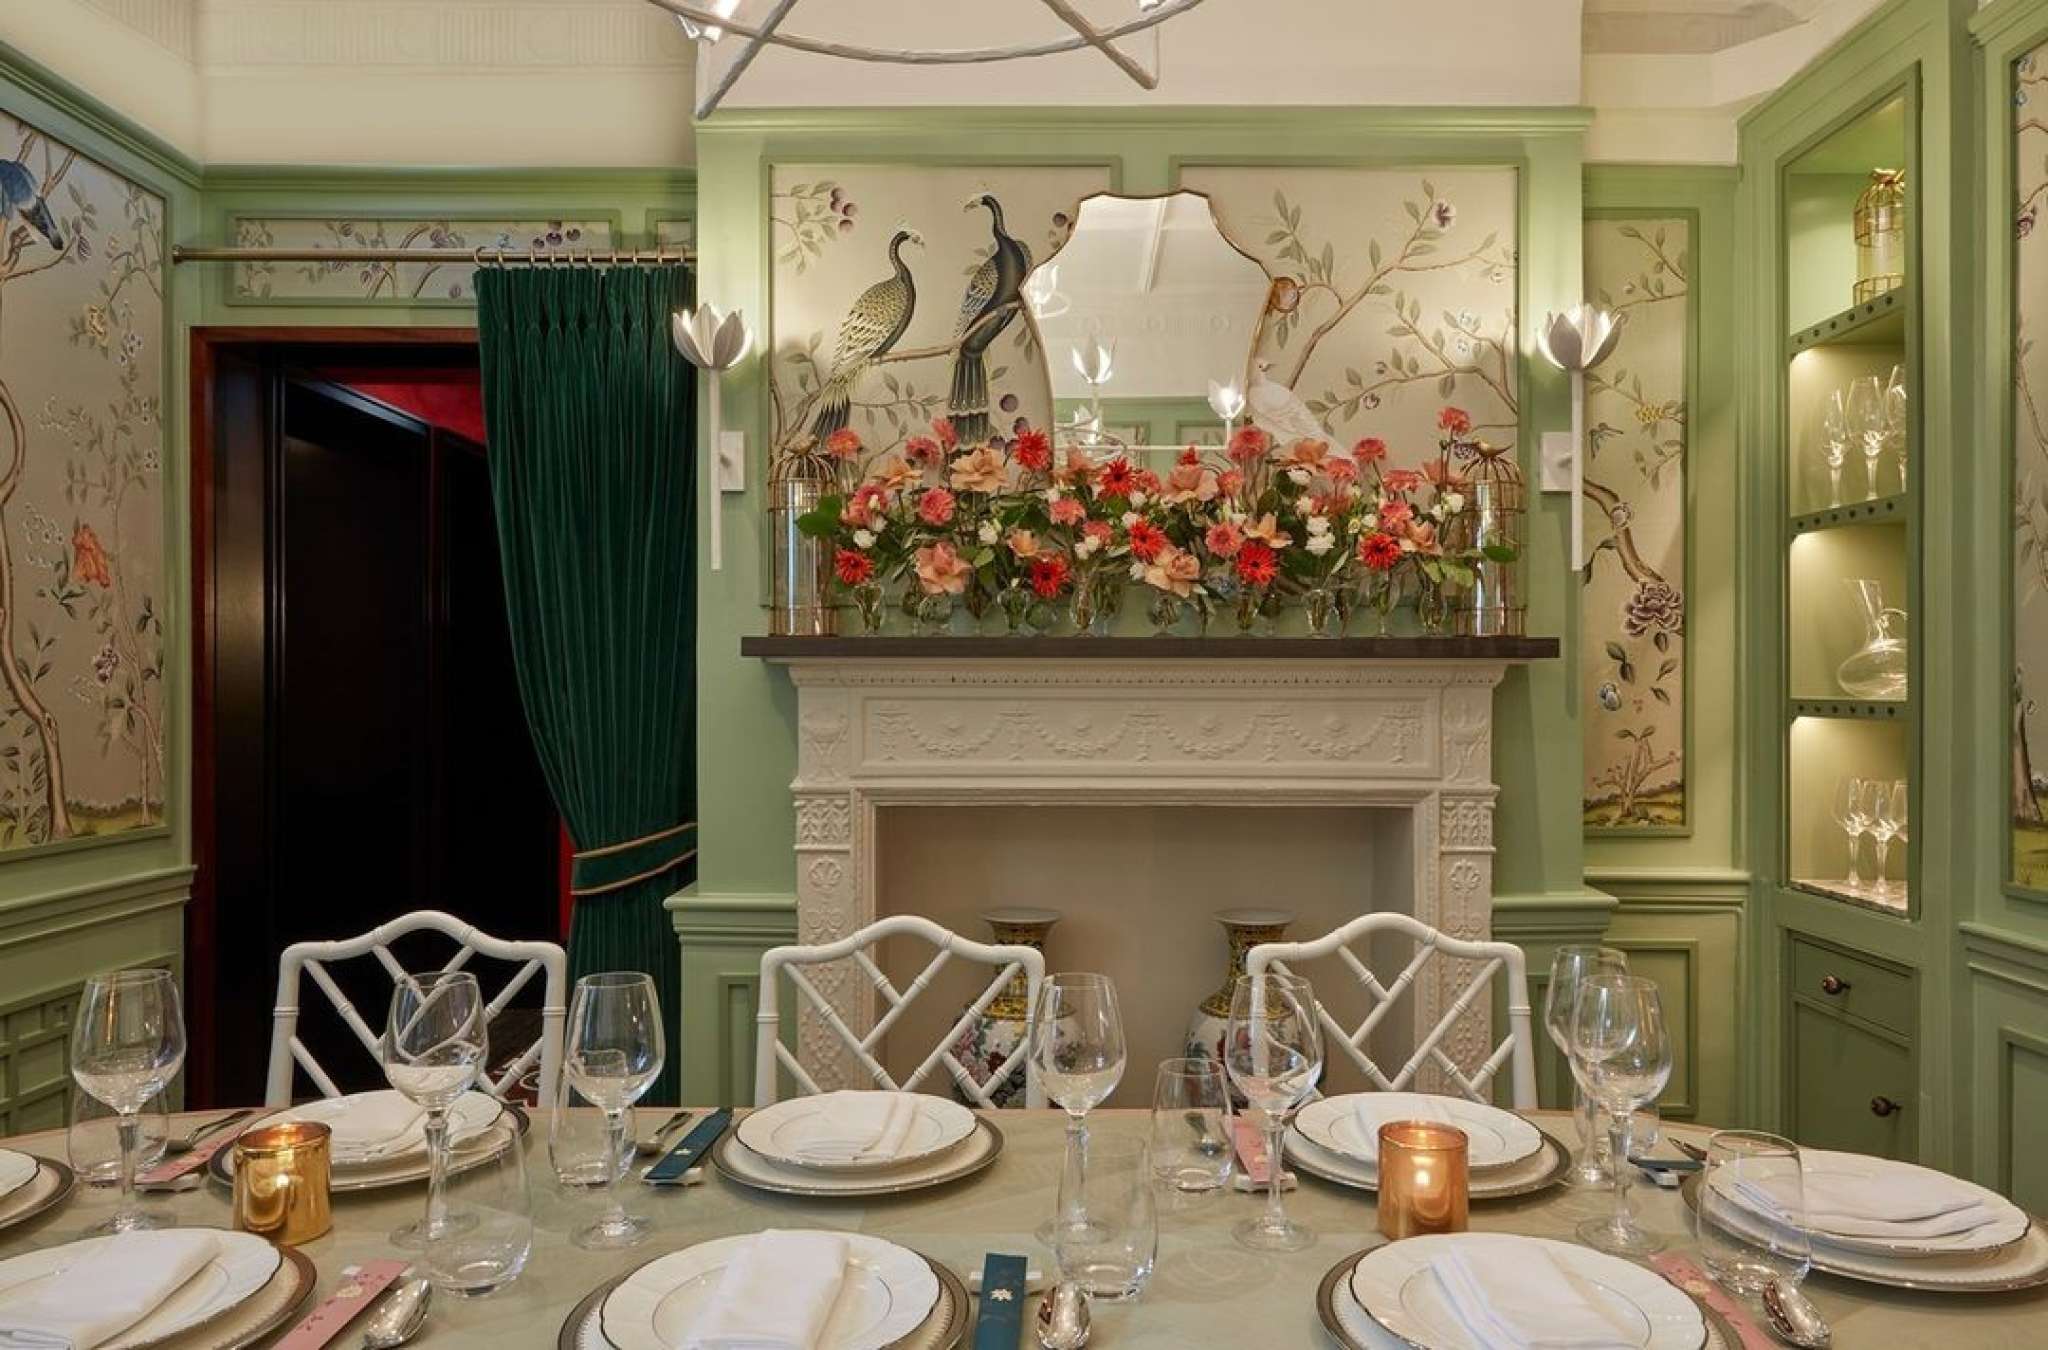 The peacock room   laden with intricate details and apt for intimate celebrations  __our beautiful private dining room of hand painted silk chinoiserie wallpaper features the rooms signature peacock watching over a table for 8 in front o.